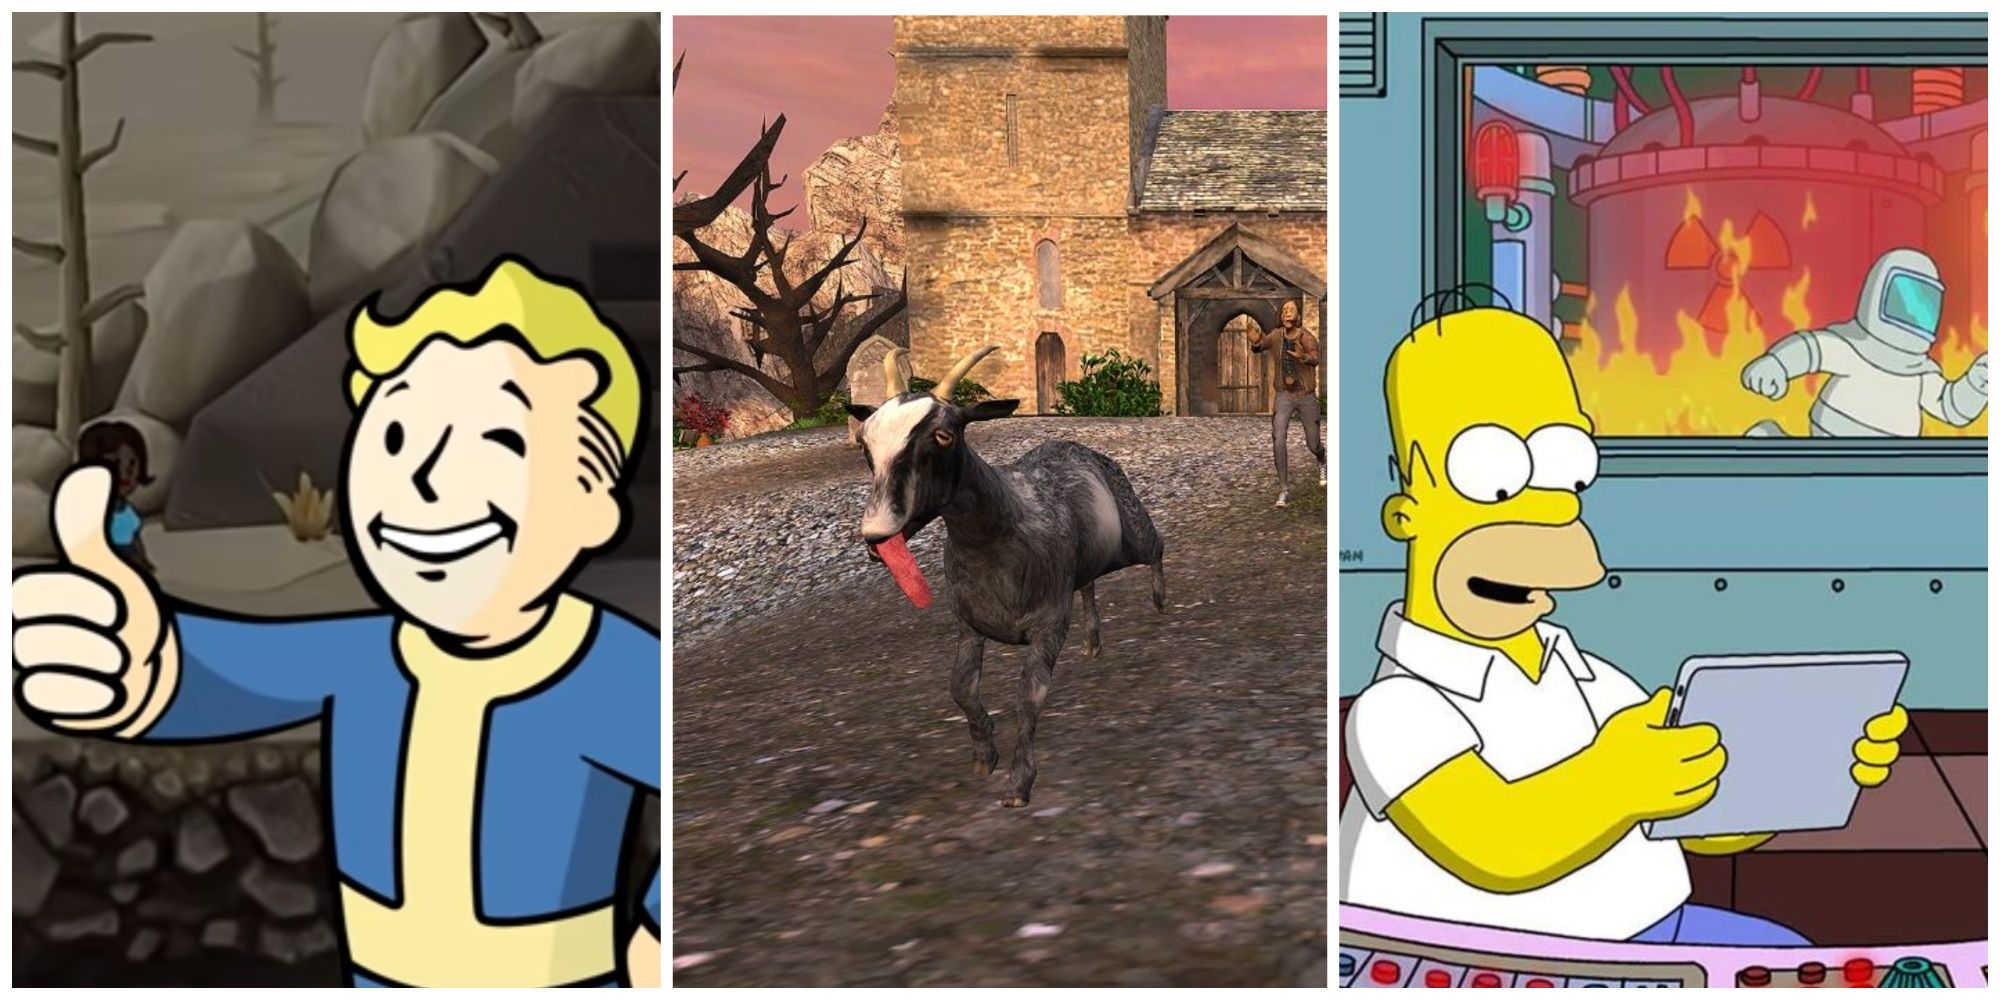 Best Mobile Simulation Games fallout shelter fallout bo, goat simulator, and the simpsons' homer simpson